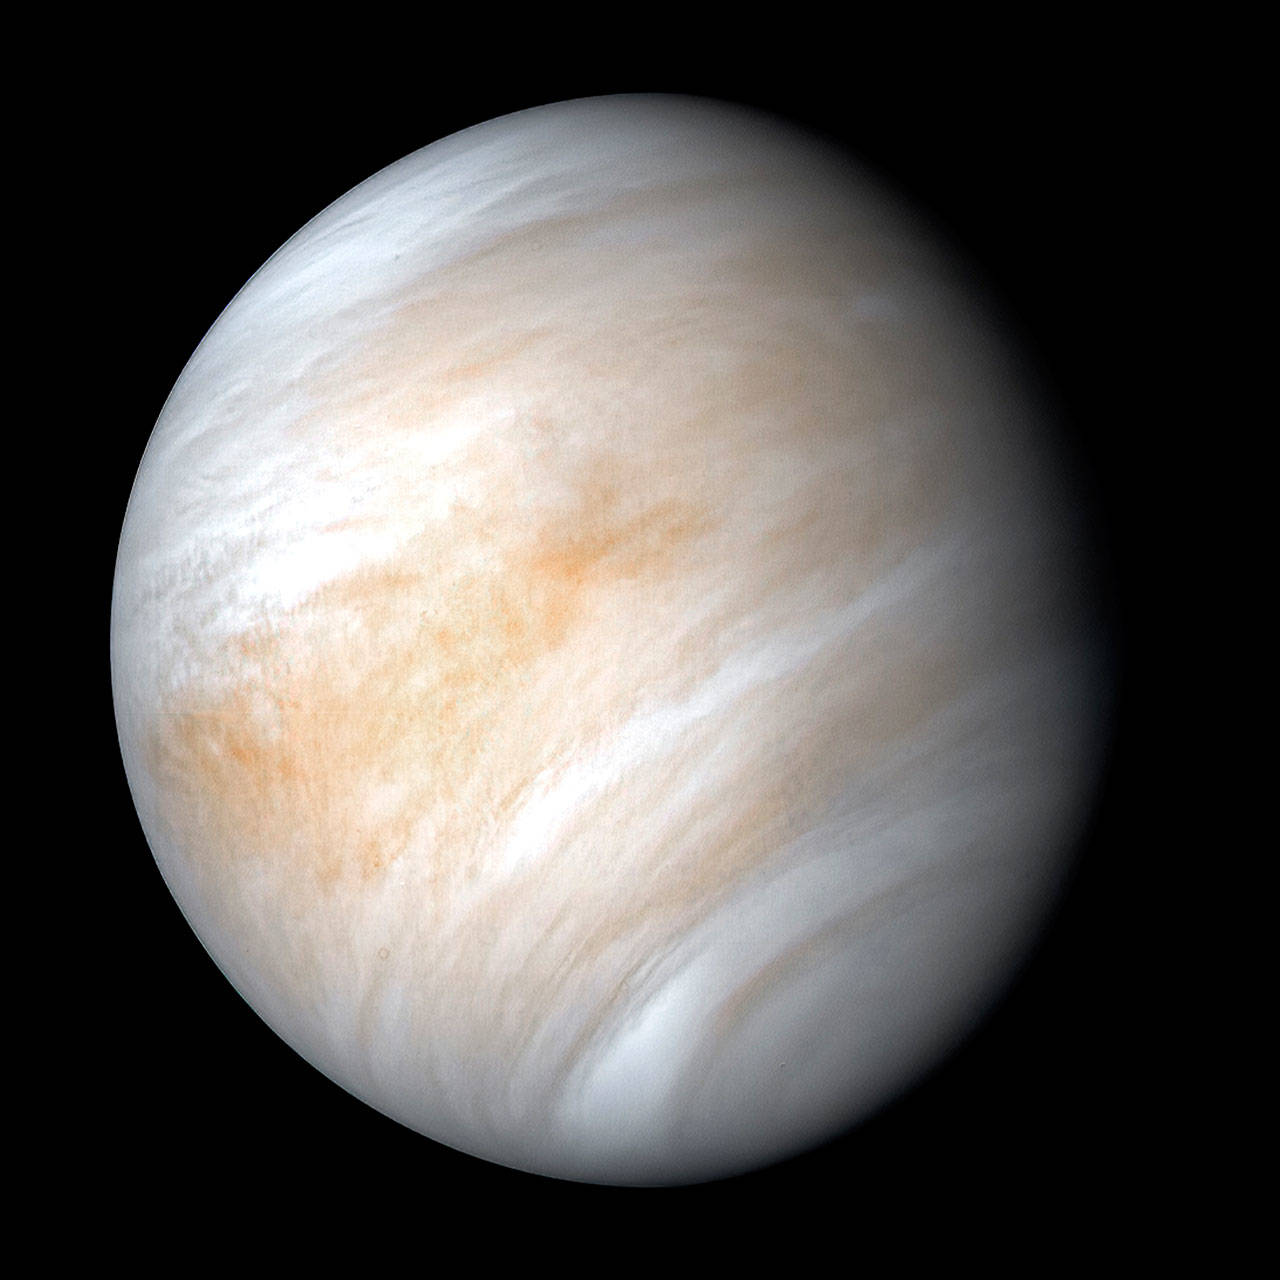 A false color composite of the planet Venus created by combining images taken using orange and ultraviolet spectral filters on the Mariner 10’s imaging camera. A group of scientists say they have found possible signs of extraterrestrial life in the thick, toxic clouds of Venus. (NASA/JPL-Caltech)